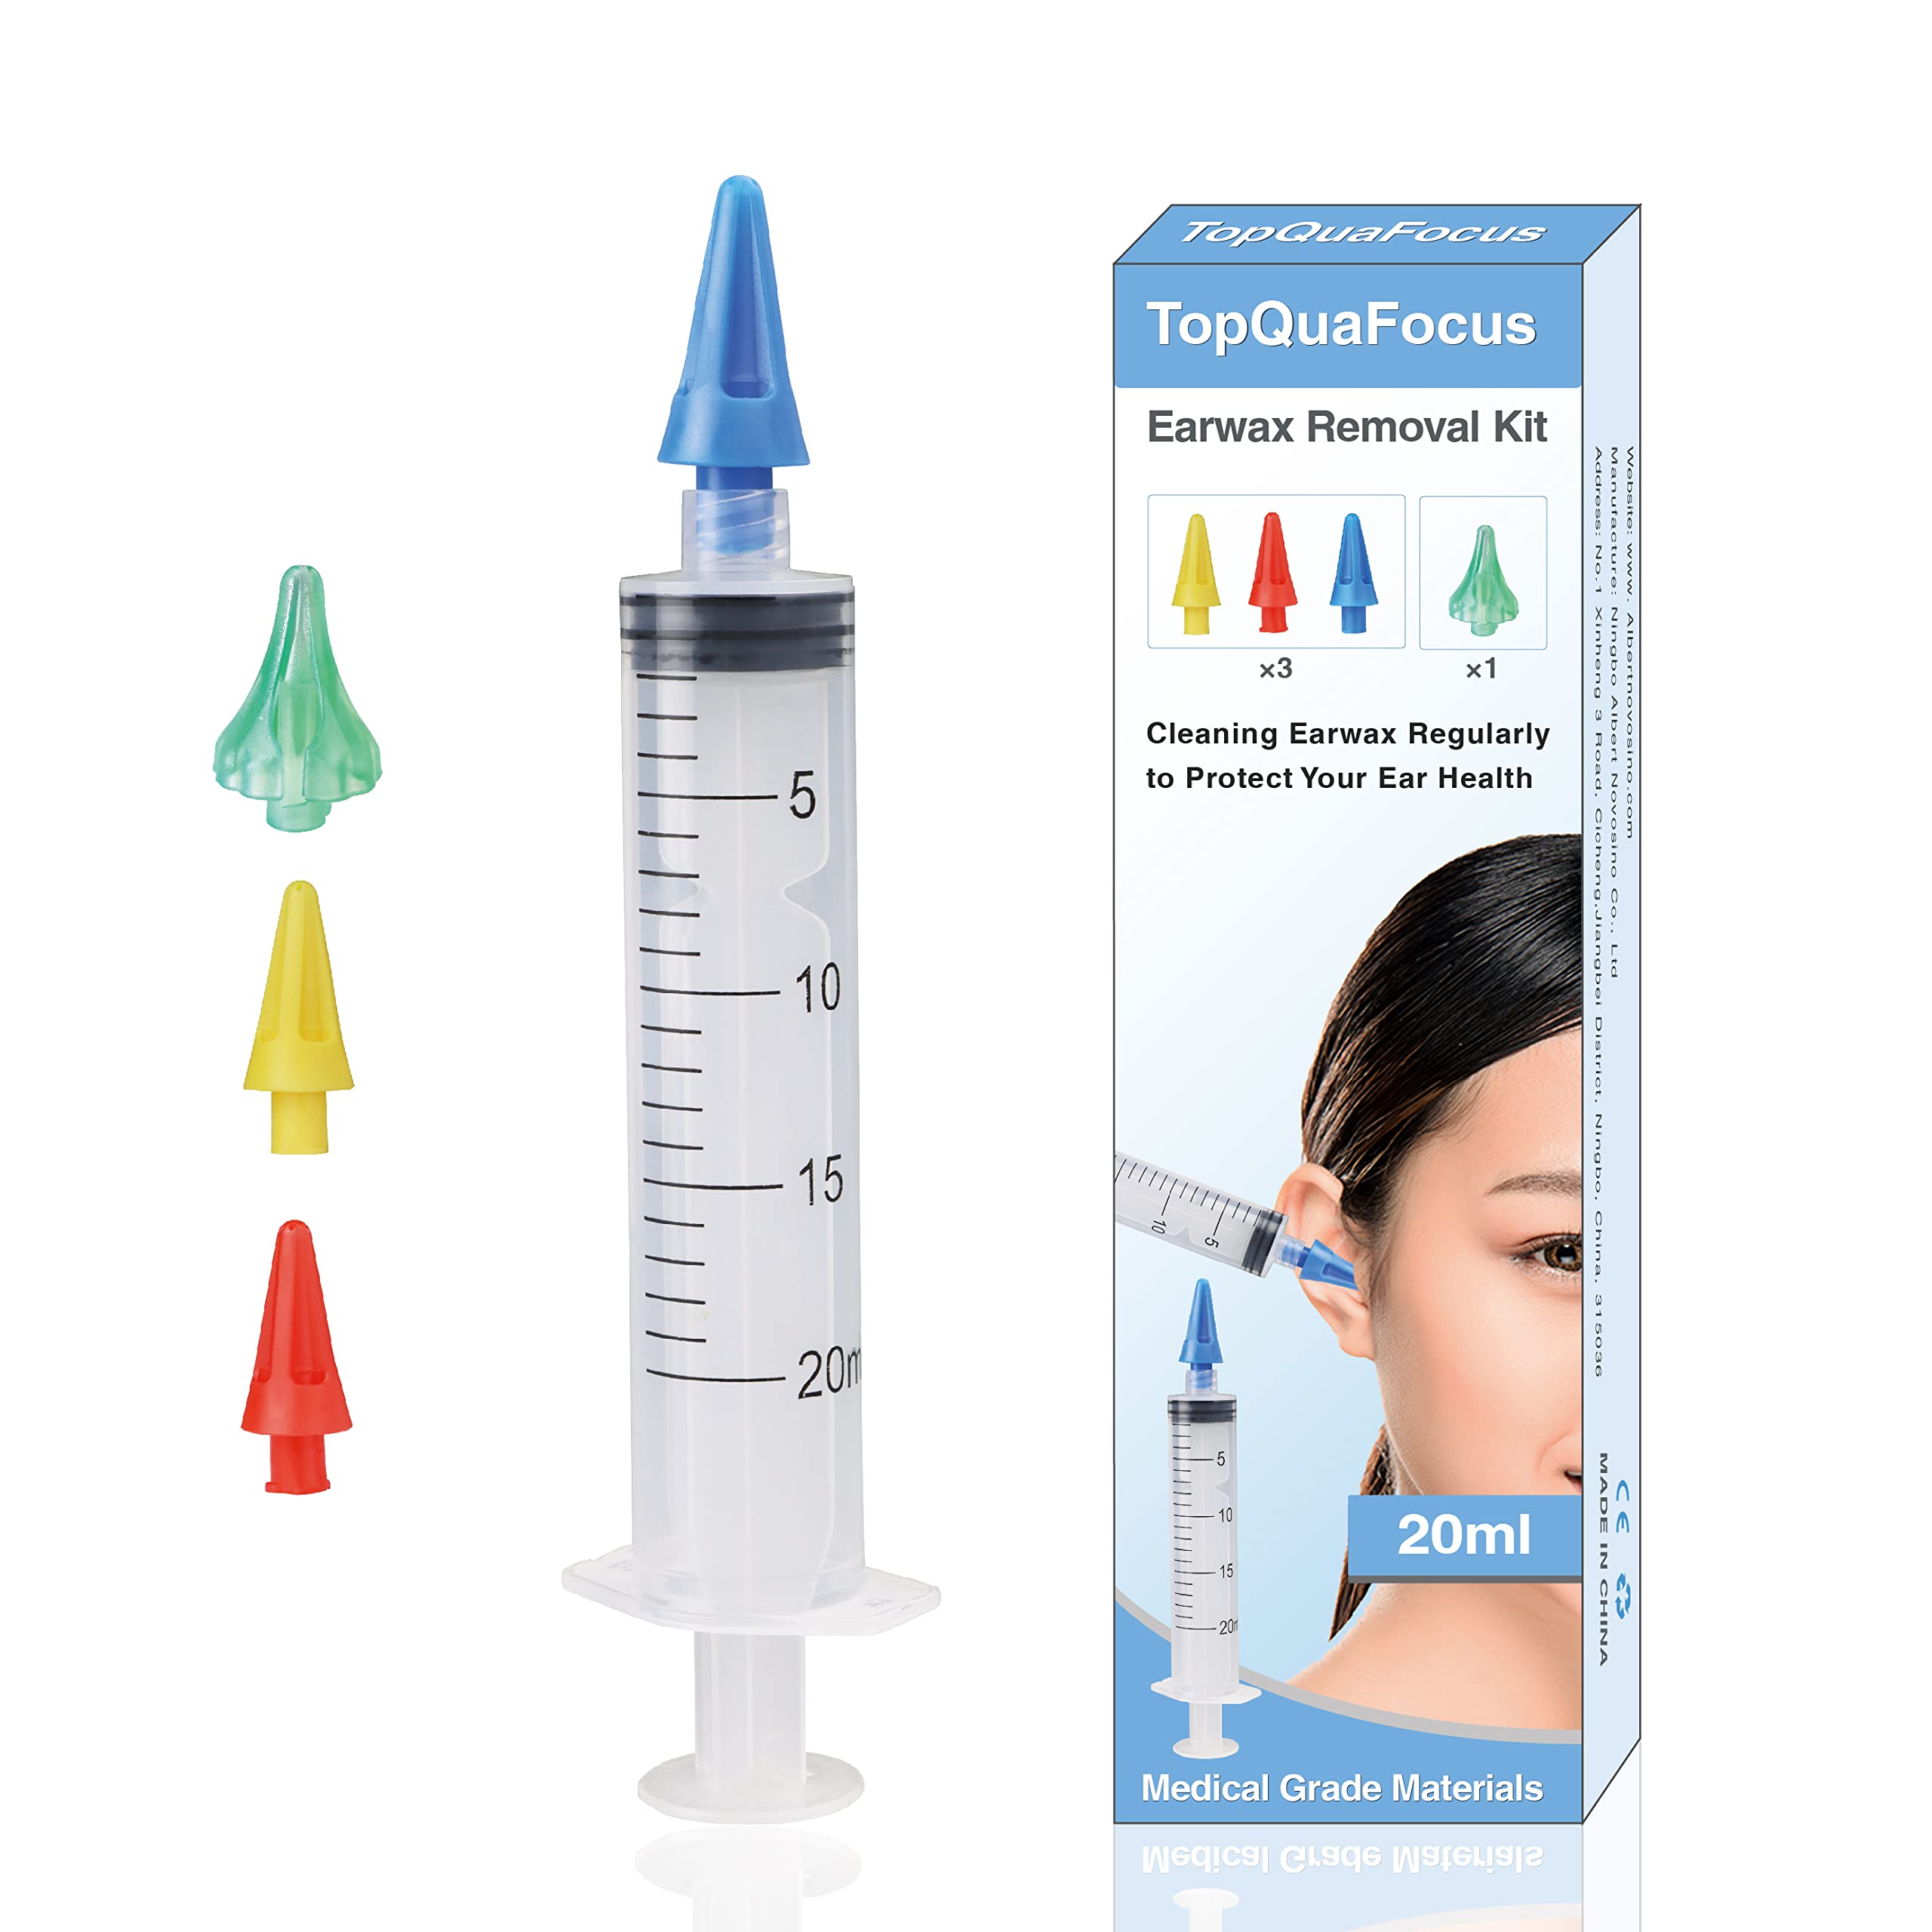 Equate Oto-Scoop, Natural Patented Plastic Ear Wax Remover Tool, Flex Tip  Earpick Solution